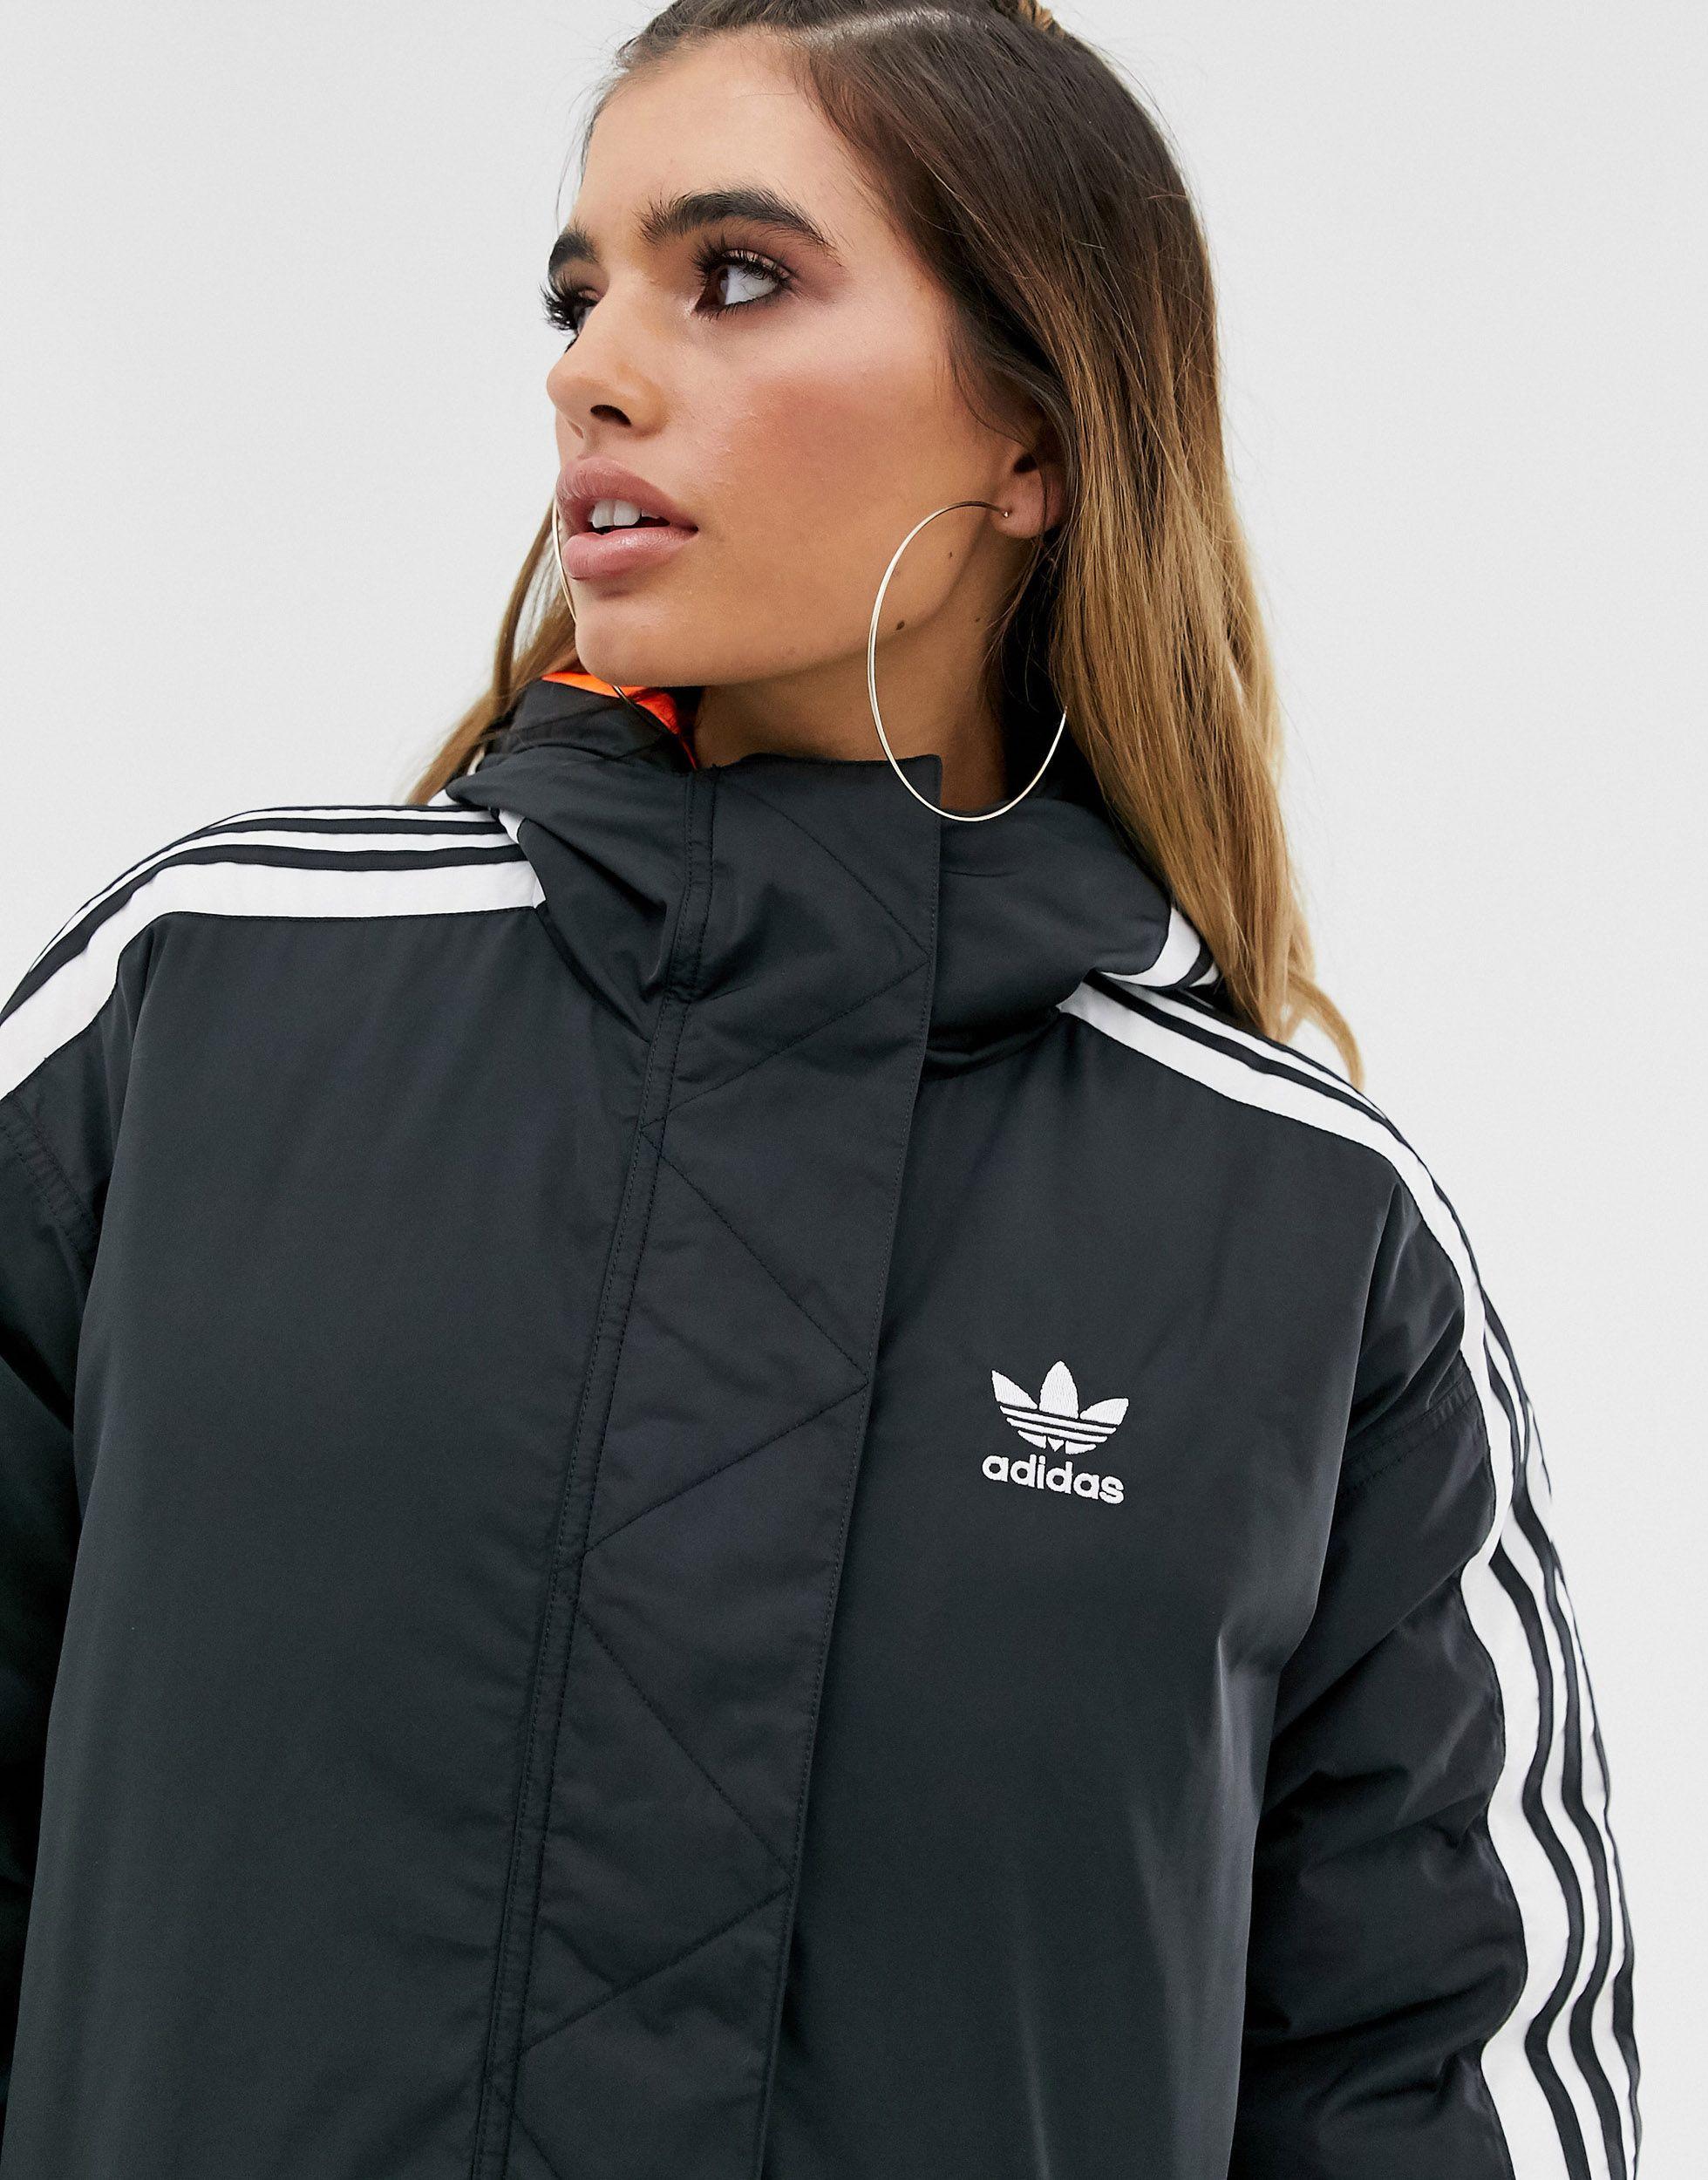 Adidas Originals Parka With 3 Stripes In Luxembourg, 32% - mpgc.net